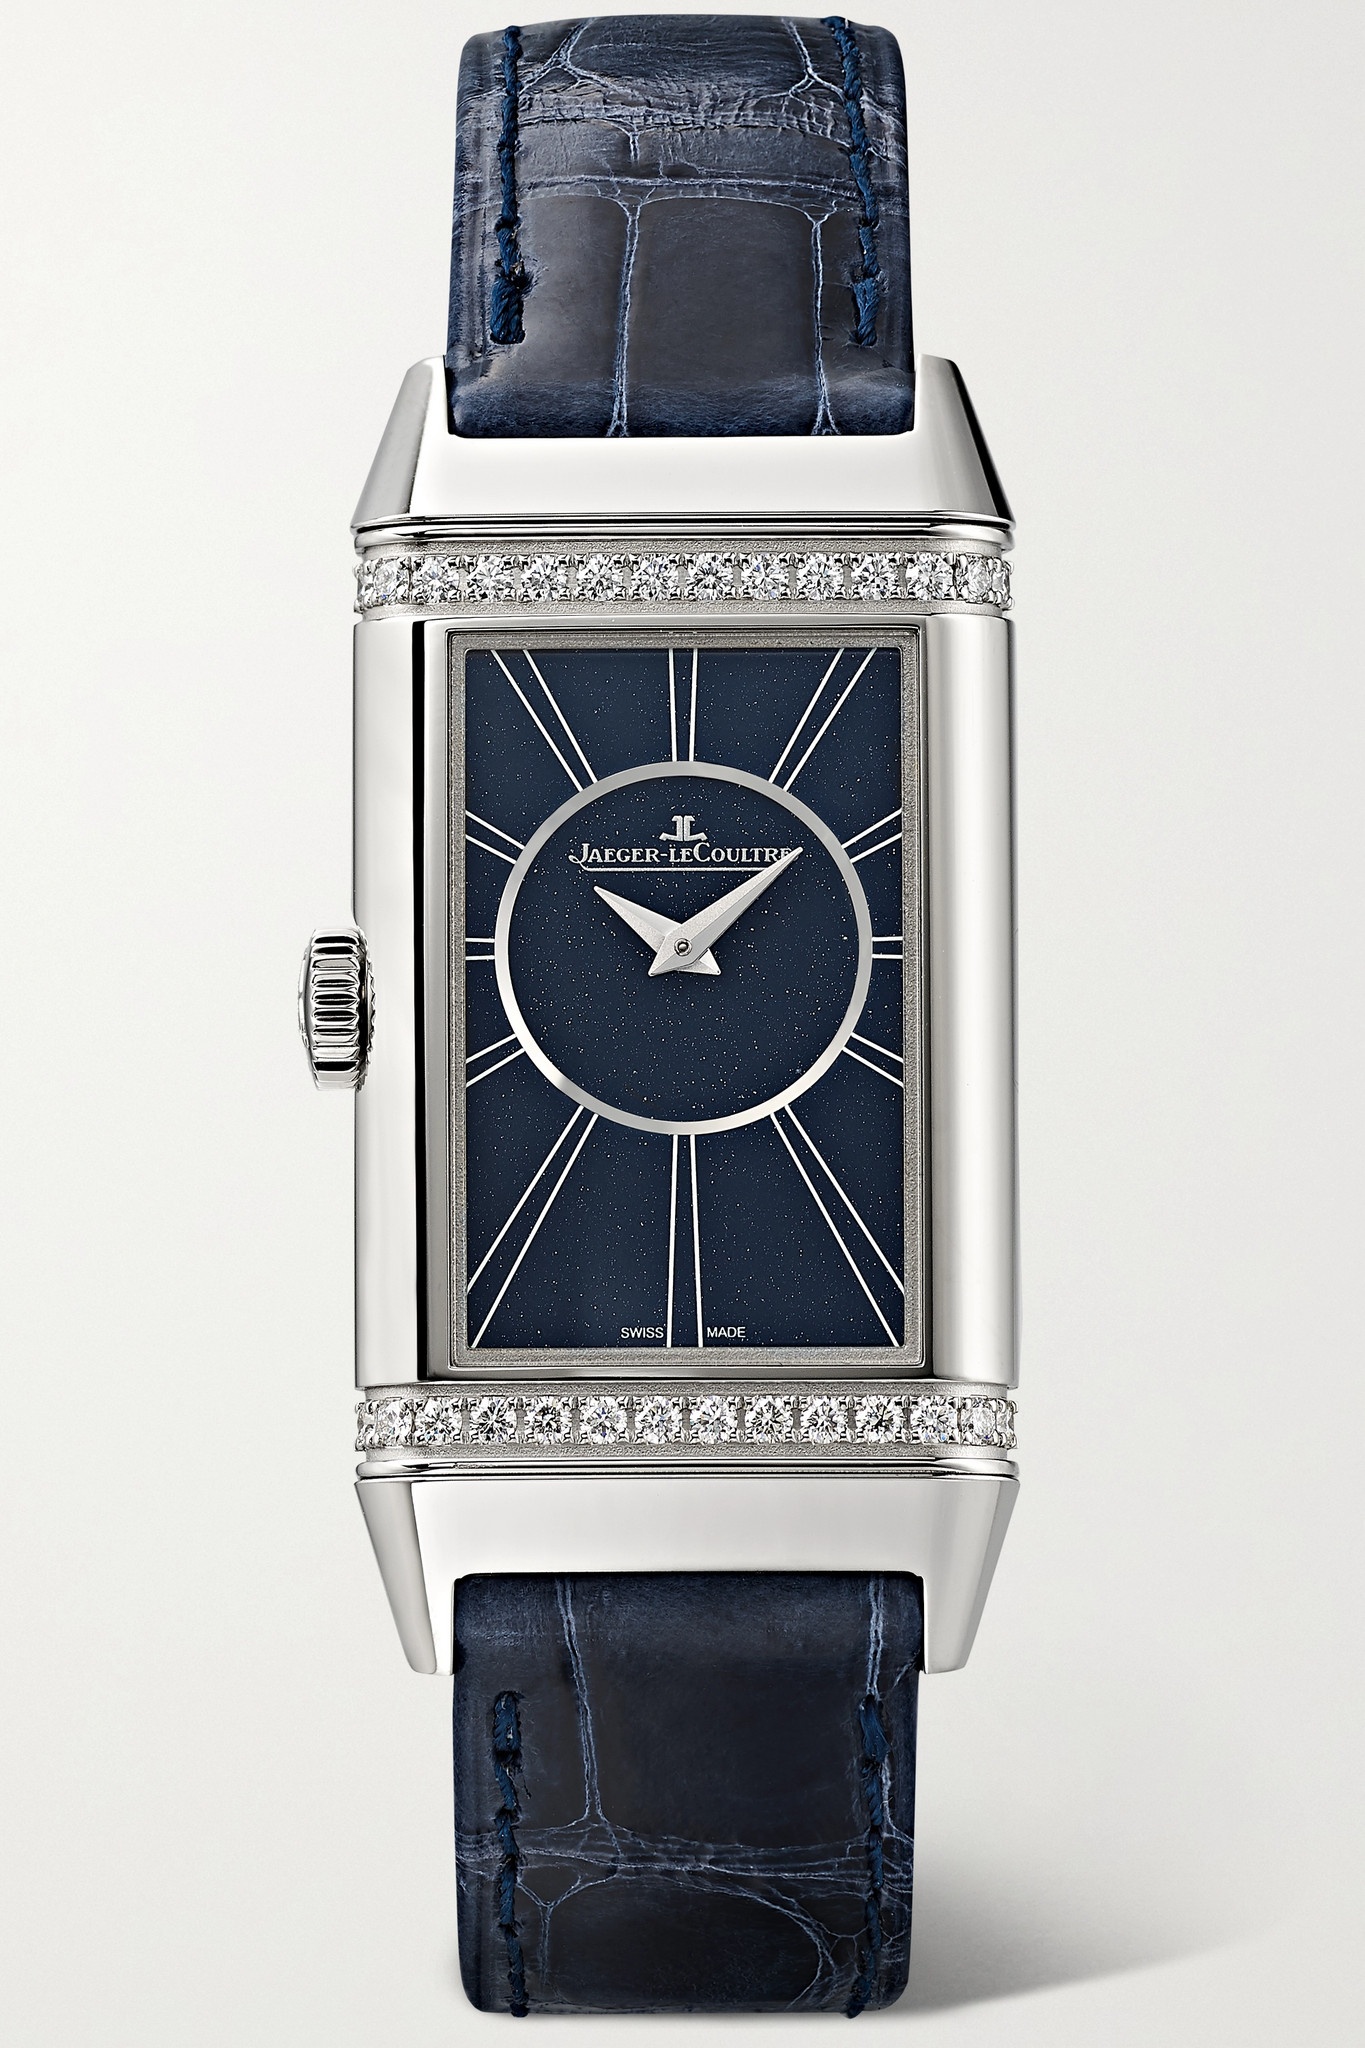 Reverso One Duetto 40mm x 20mm stainless steel, diamond and alligator watch - 9